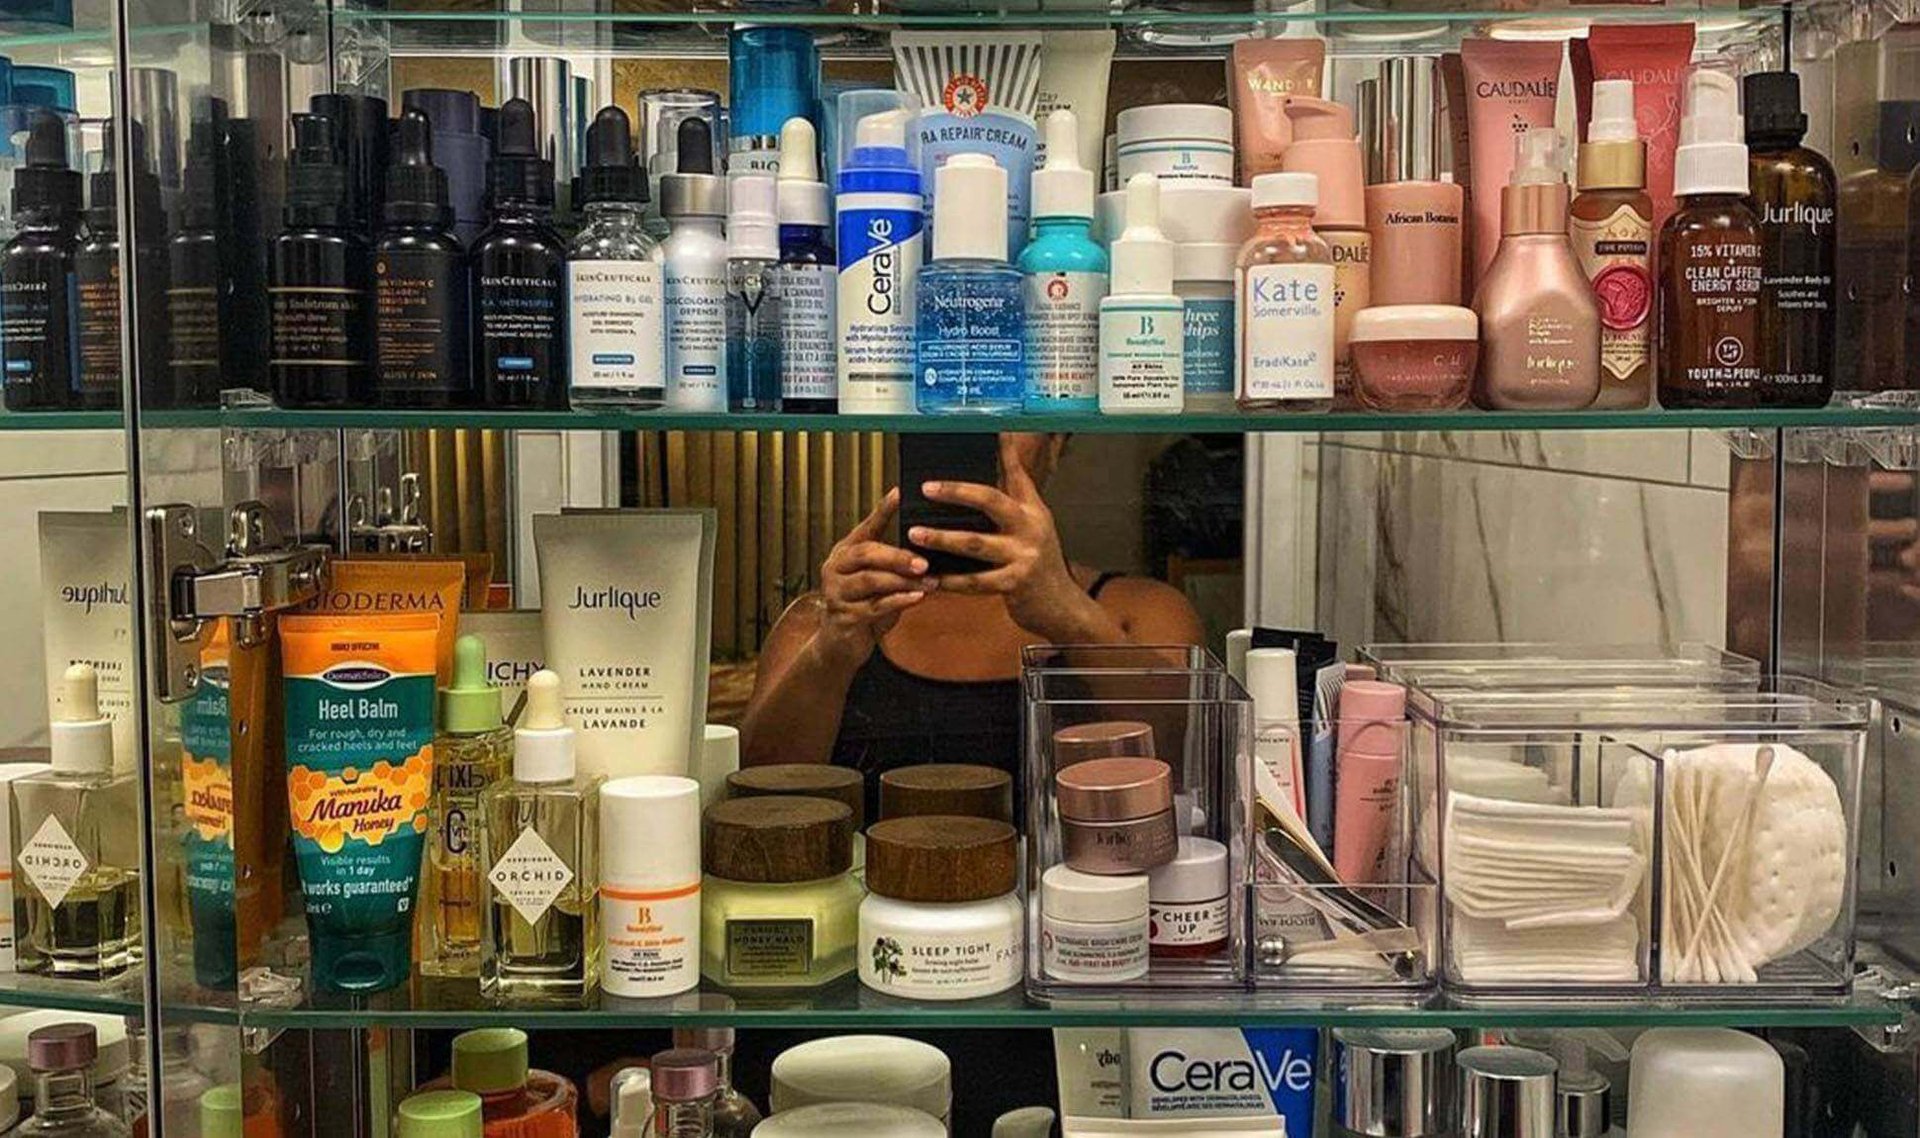 Reminder that skincare can look like [shelfie] : r